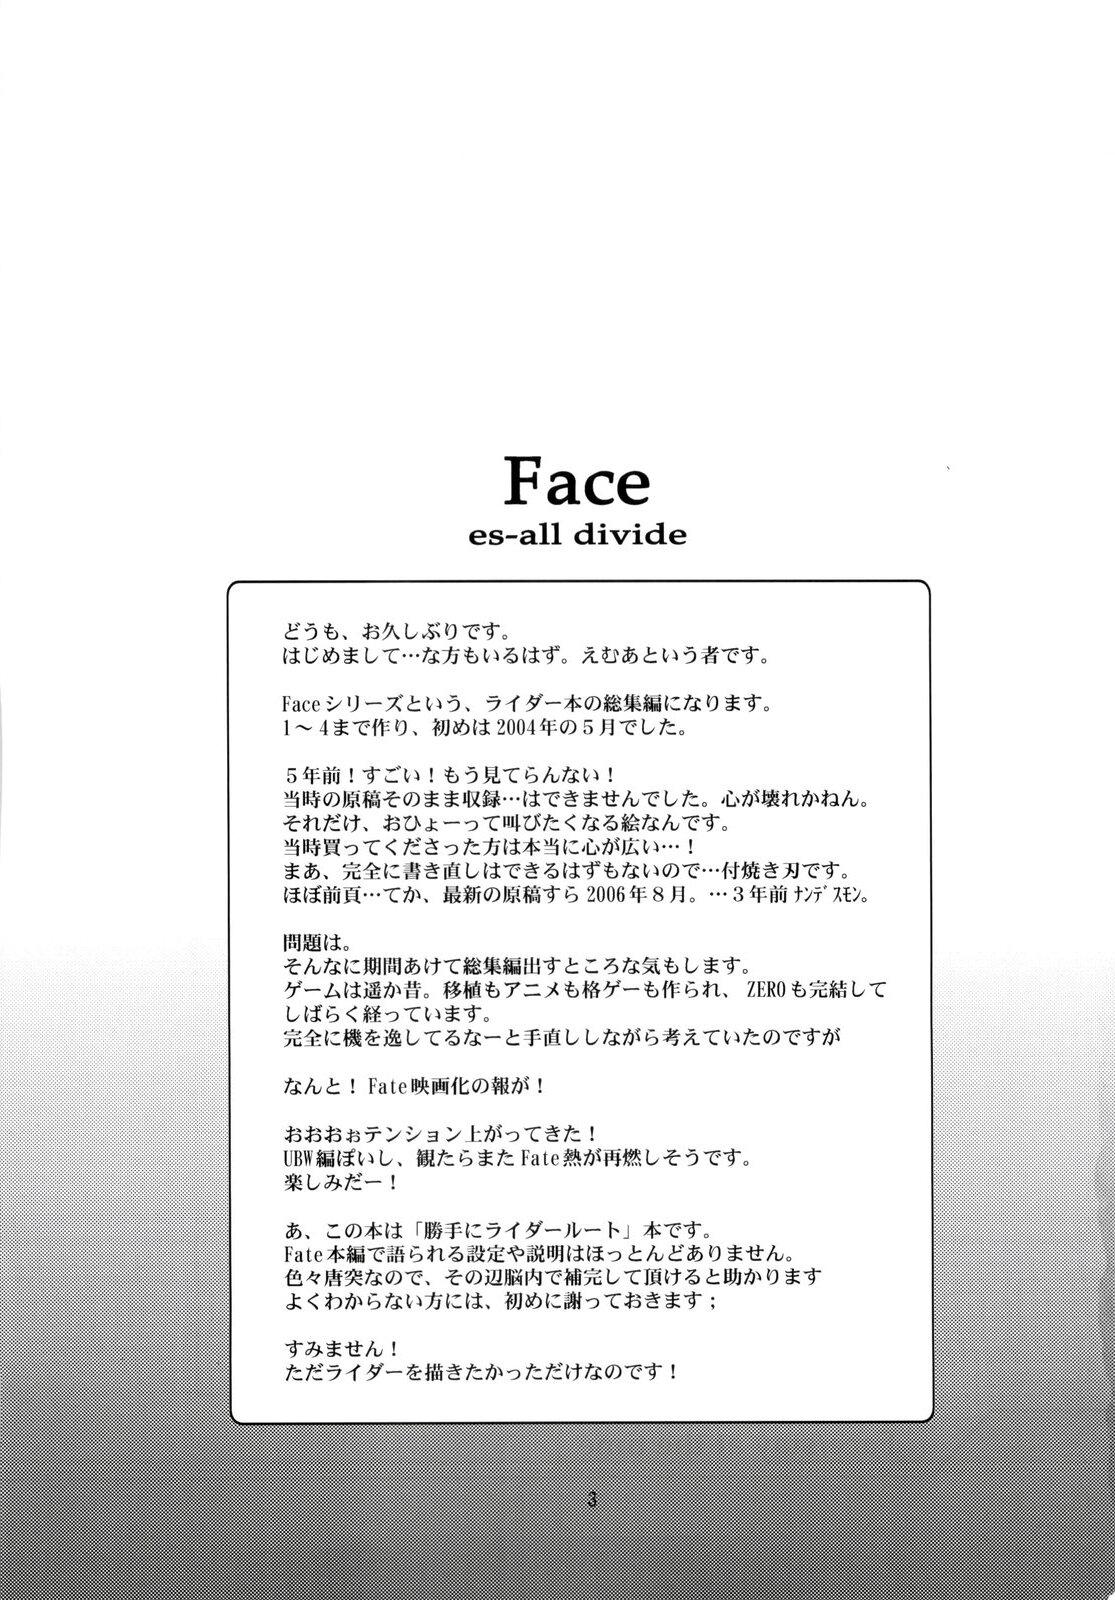 Big Dicks Face es-all divide - Fate stay night Worship - Page 2